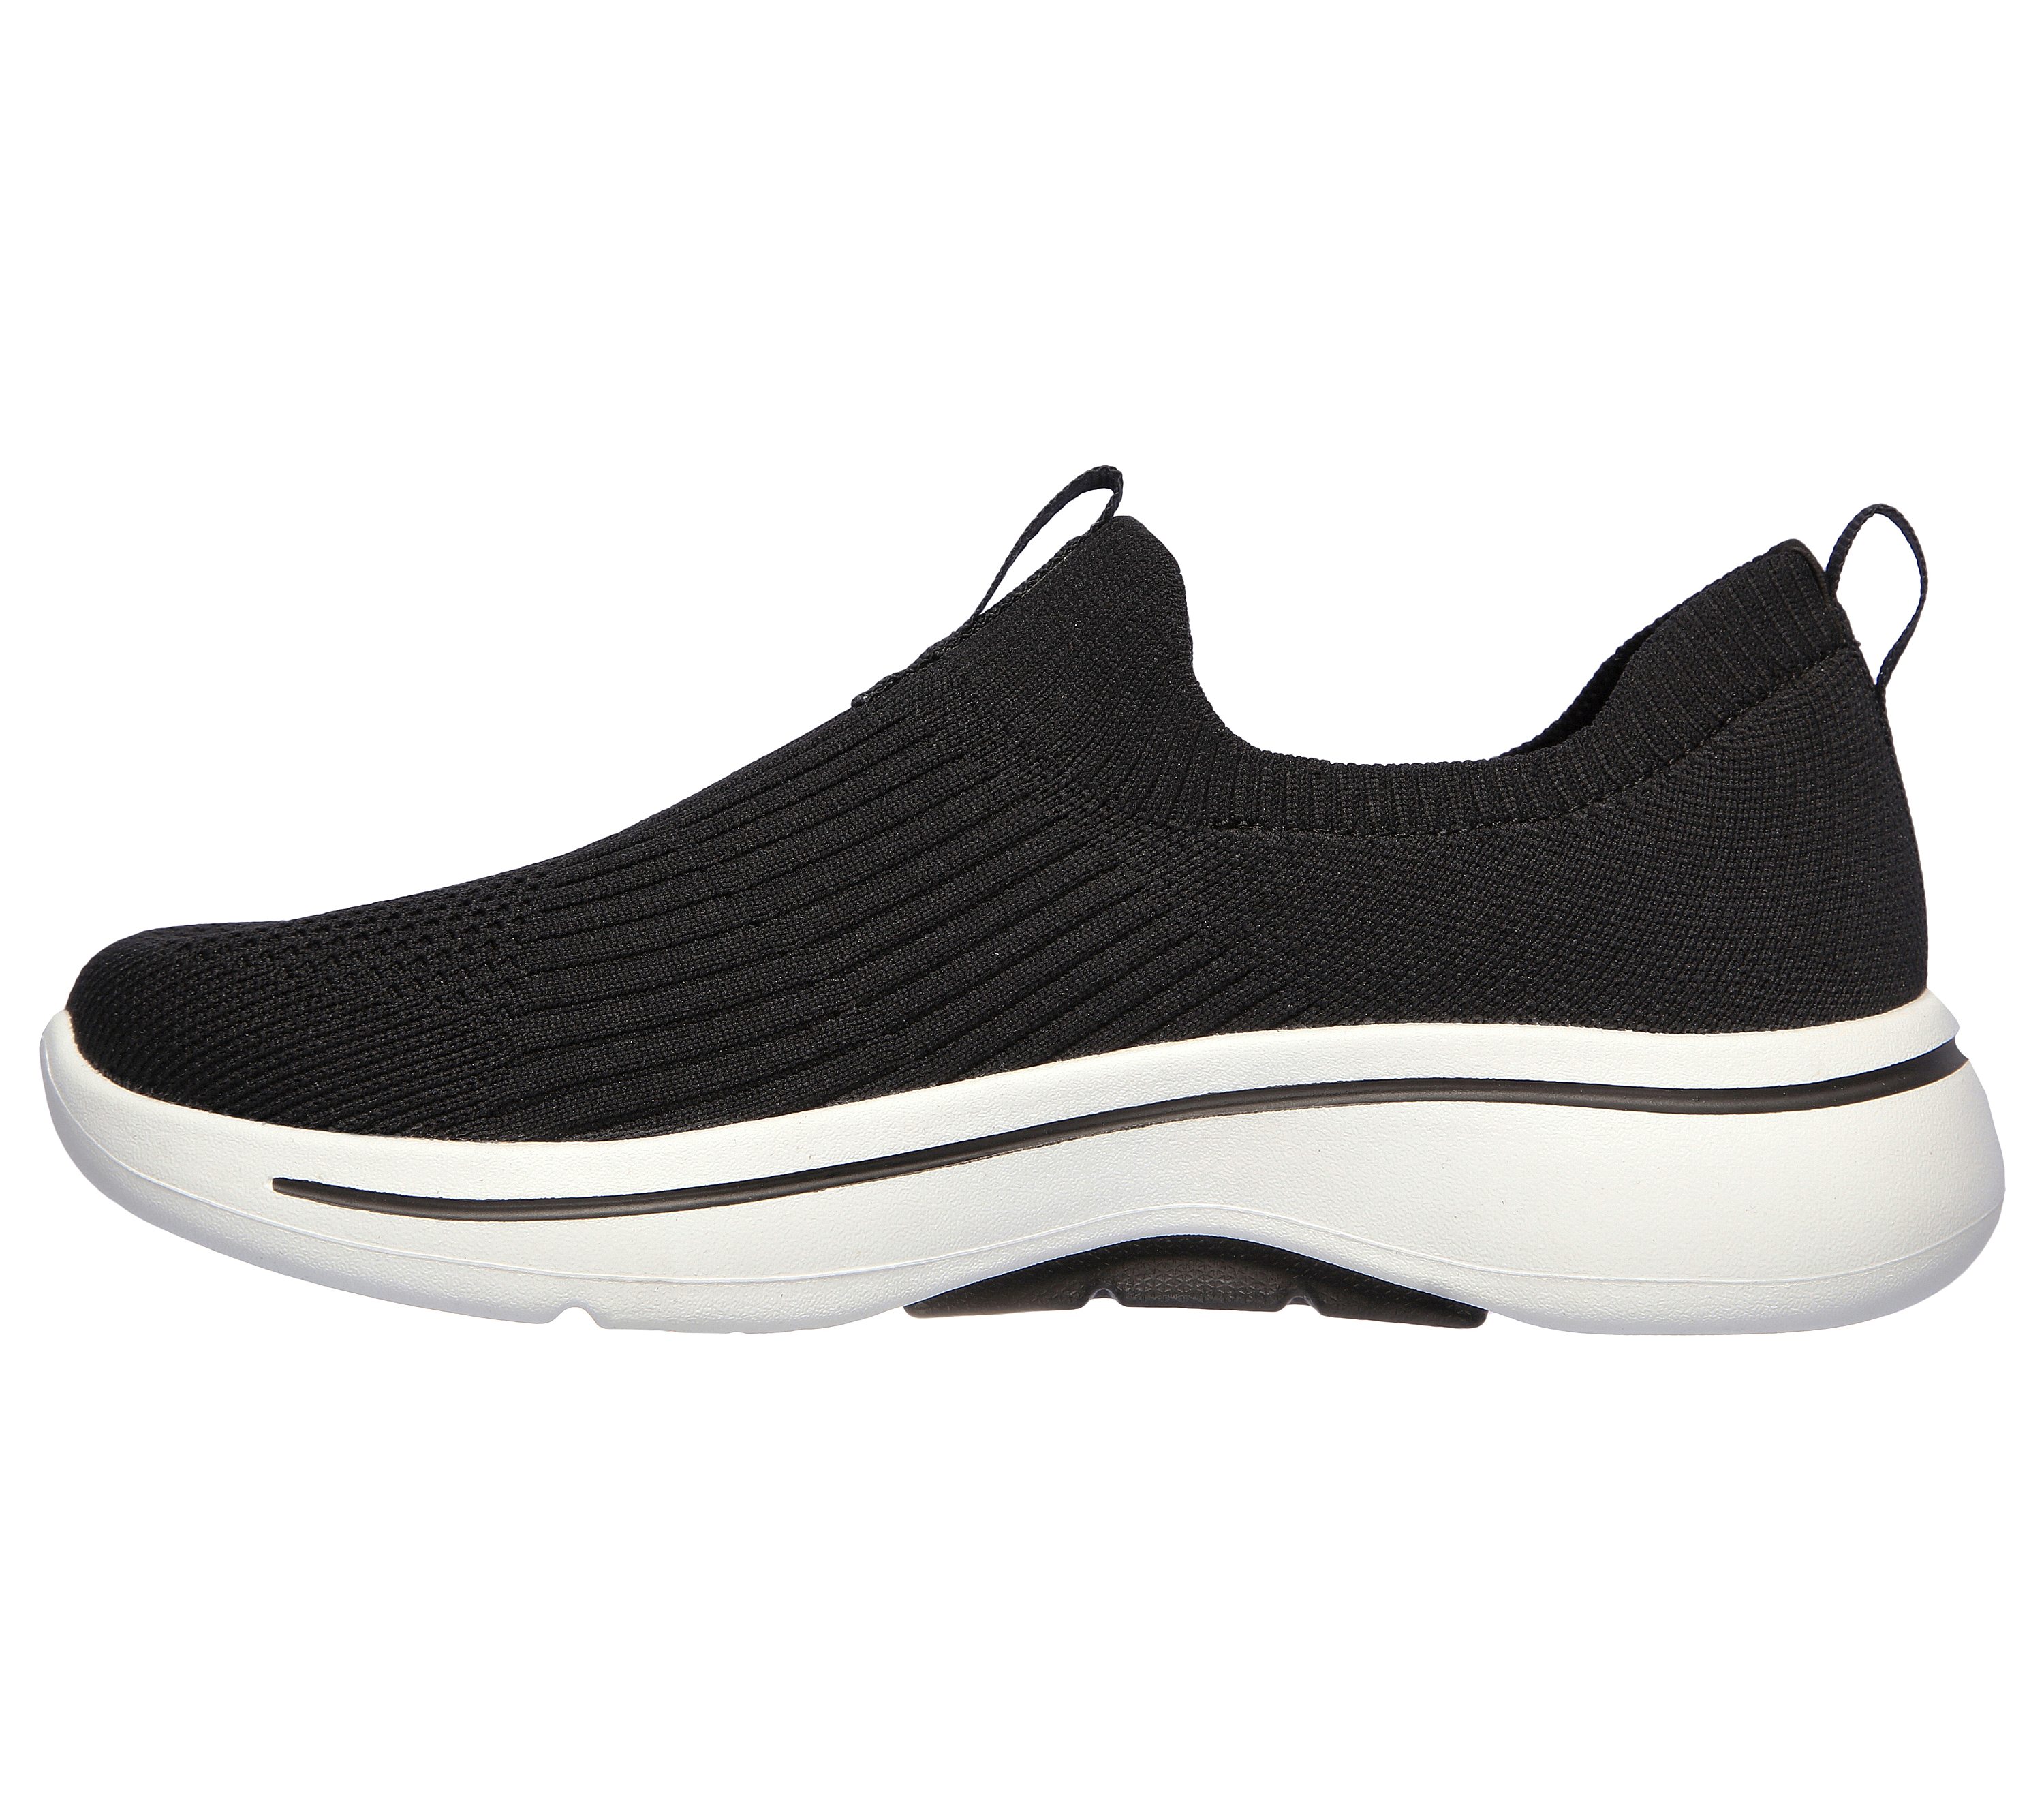 GO WALK Arch Fit - Iconic SKECHERS